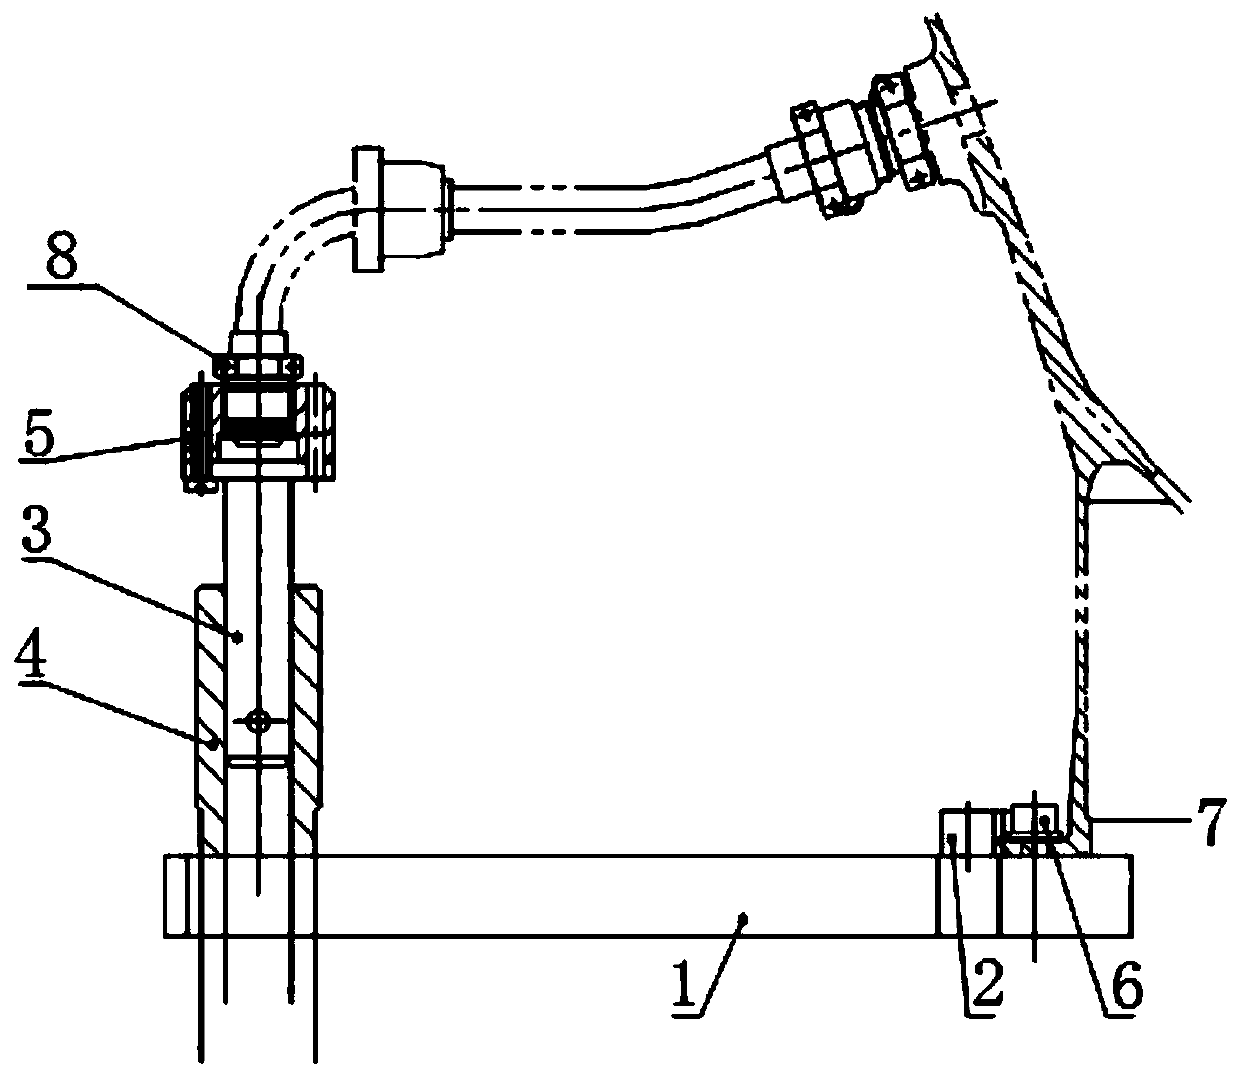 A verticality measuring device for the mouth of a single-cantilever pipeline of an aero-engine